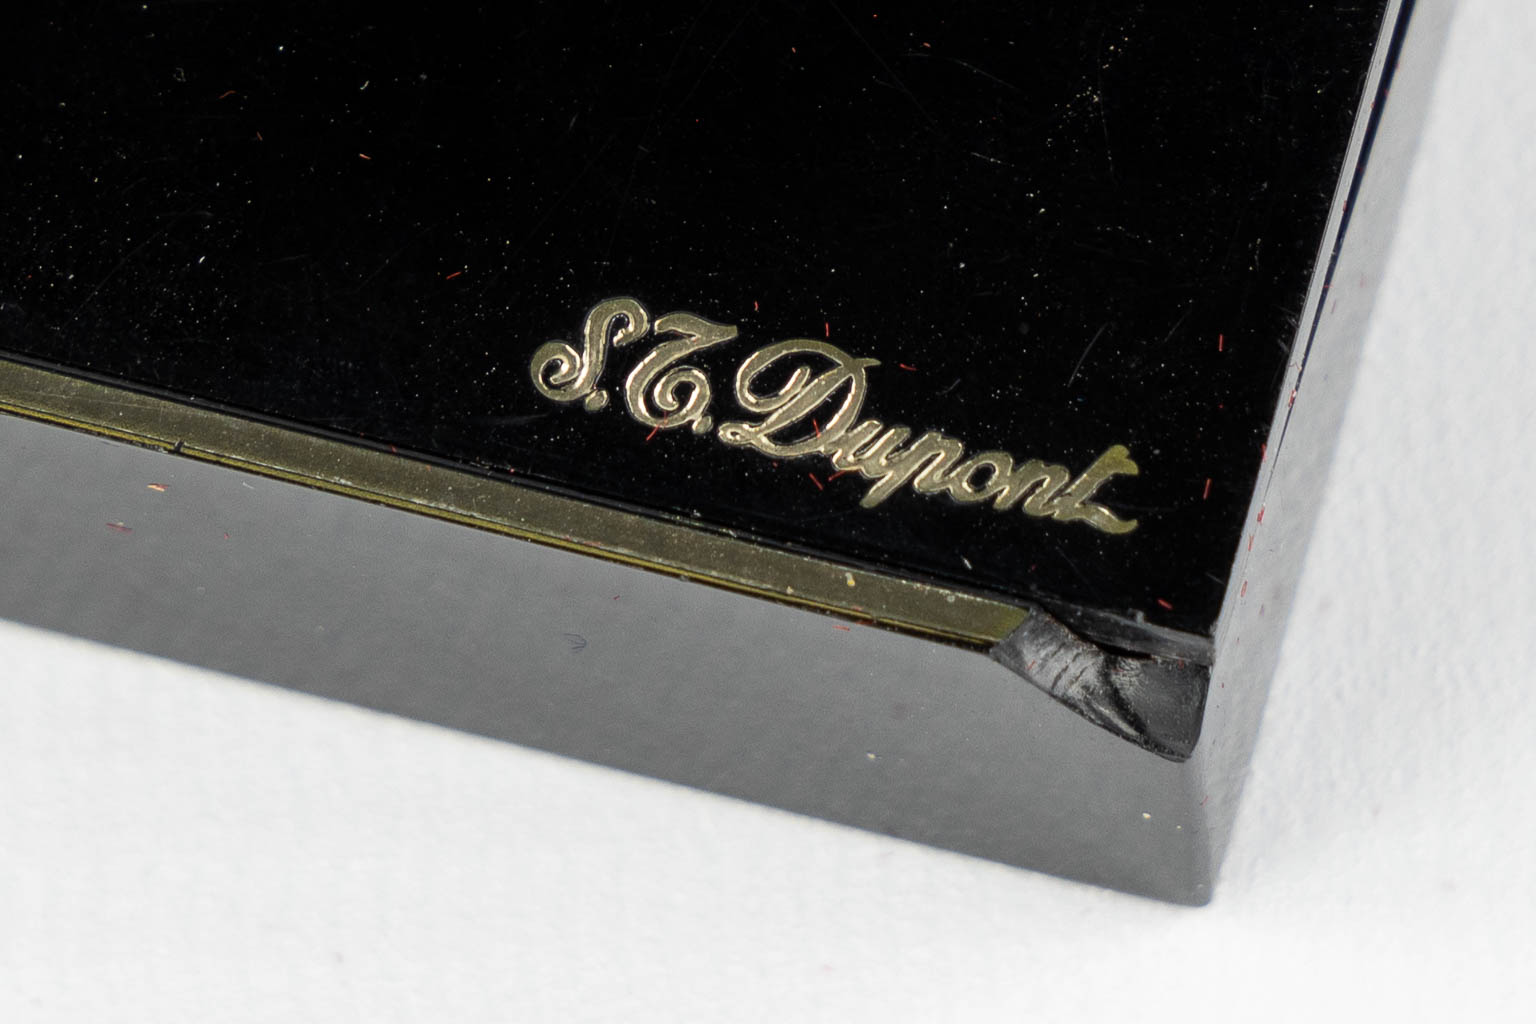 ST. Dupont, Three gold and silver plated lighters, added a Givency lighter. (L:1 x W:3,5 x H:6 cm)